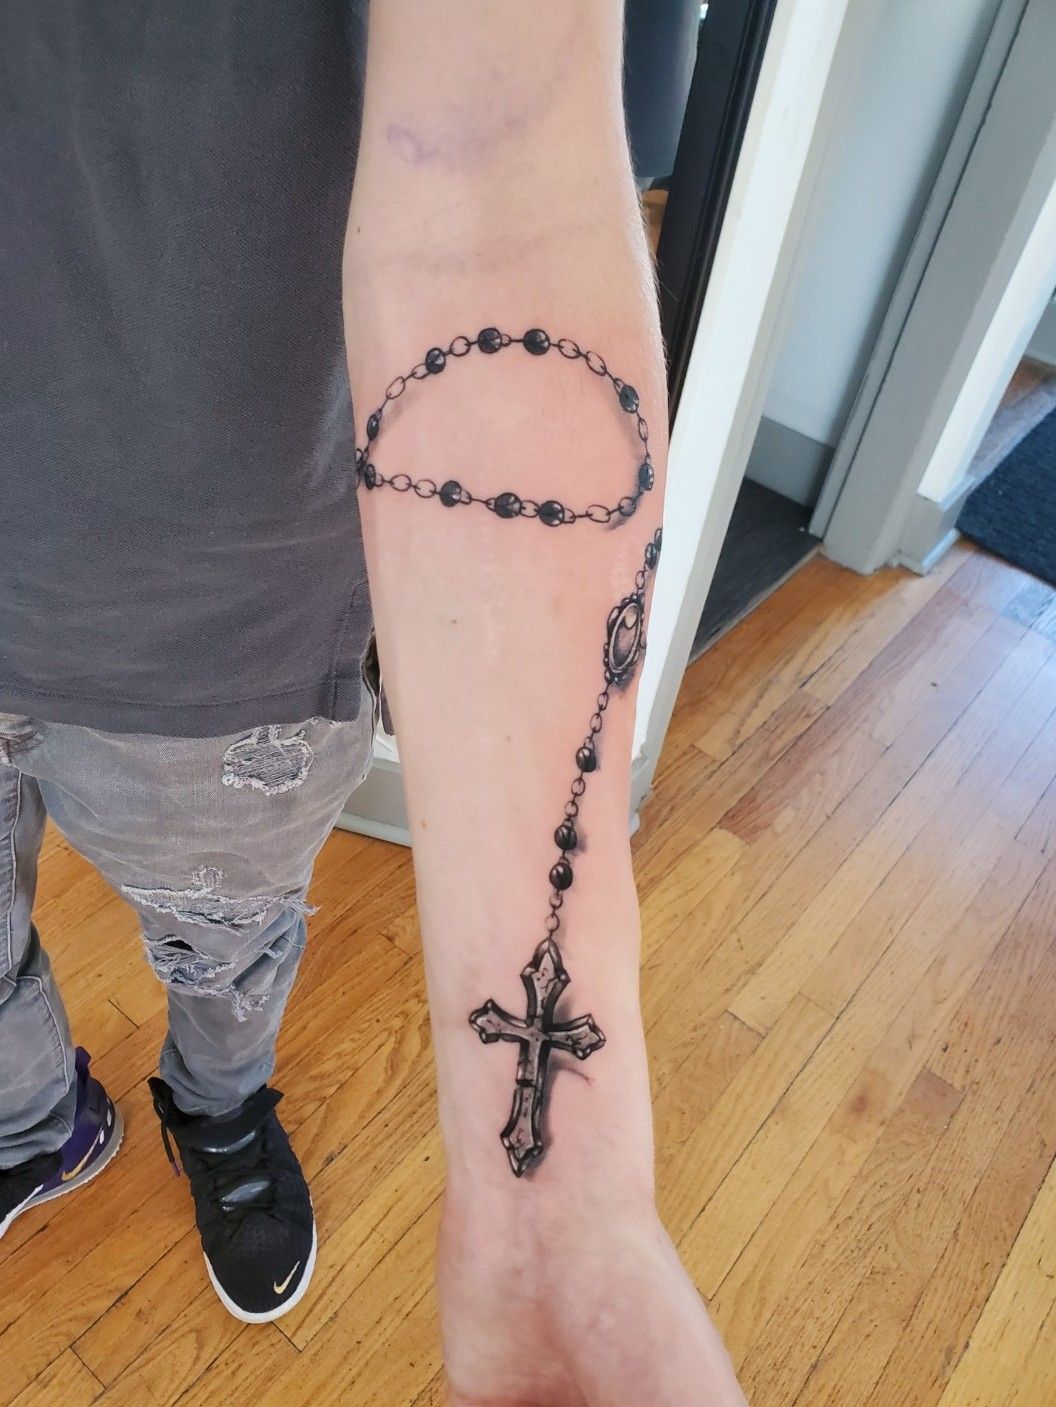 Necklace tattoo on the forearm